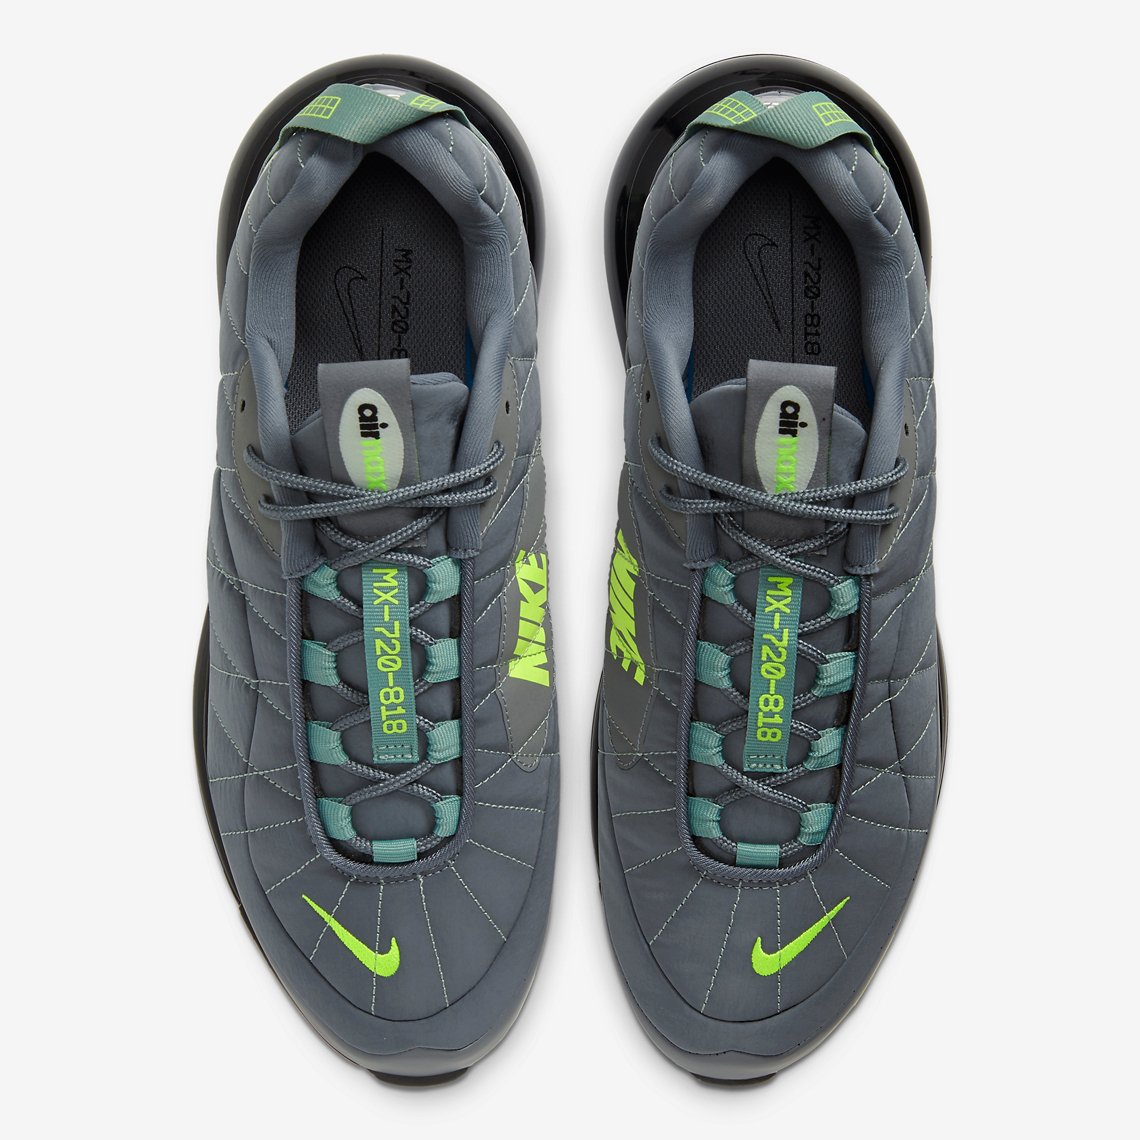 Nike Air Max 720-818 - Register Now on END. Launches